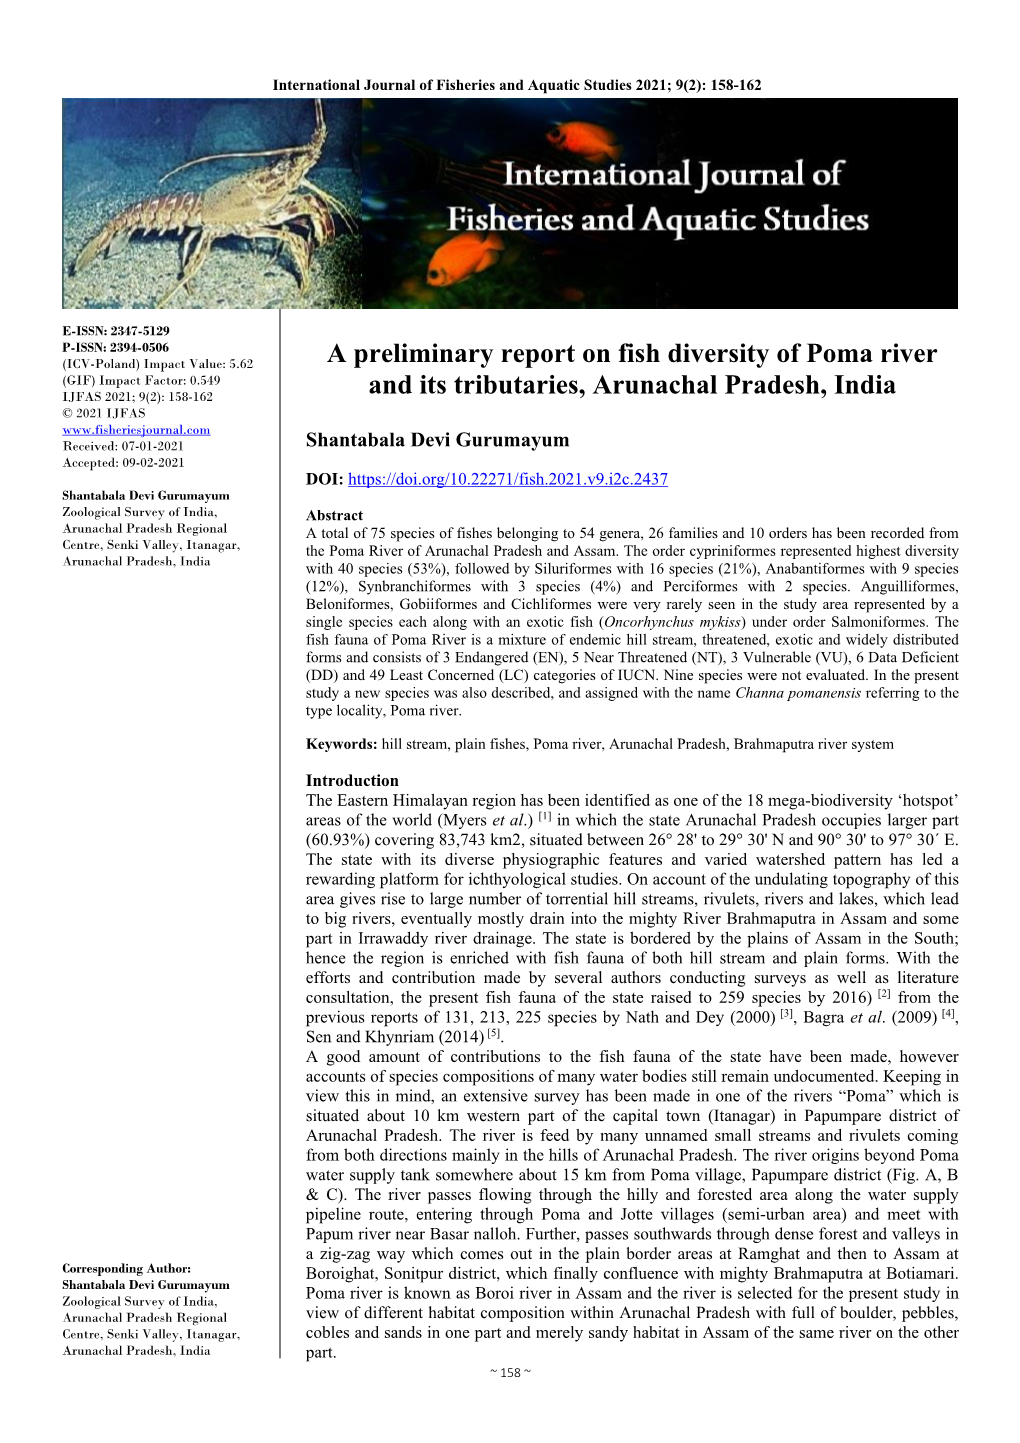 A Preliminary Report on Fish Diversity of Poma River and Its Tributaries